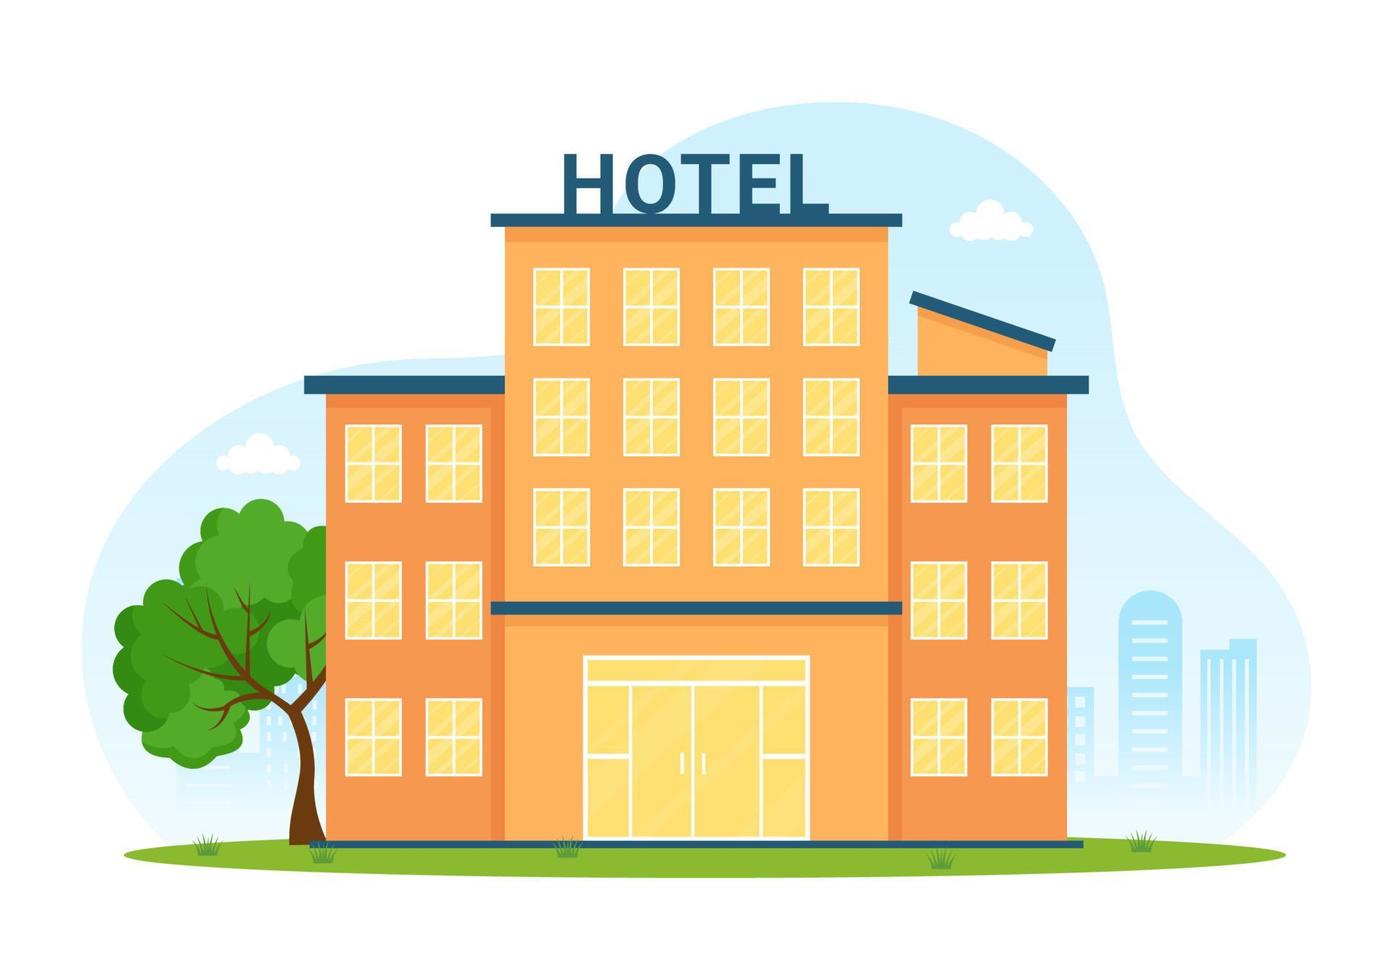 Skyscraper Hotel Building Flat Cartoon Hand Drawn Illustration Template with View on City Space of Street Panorama Design vector